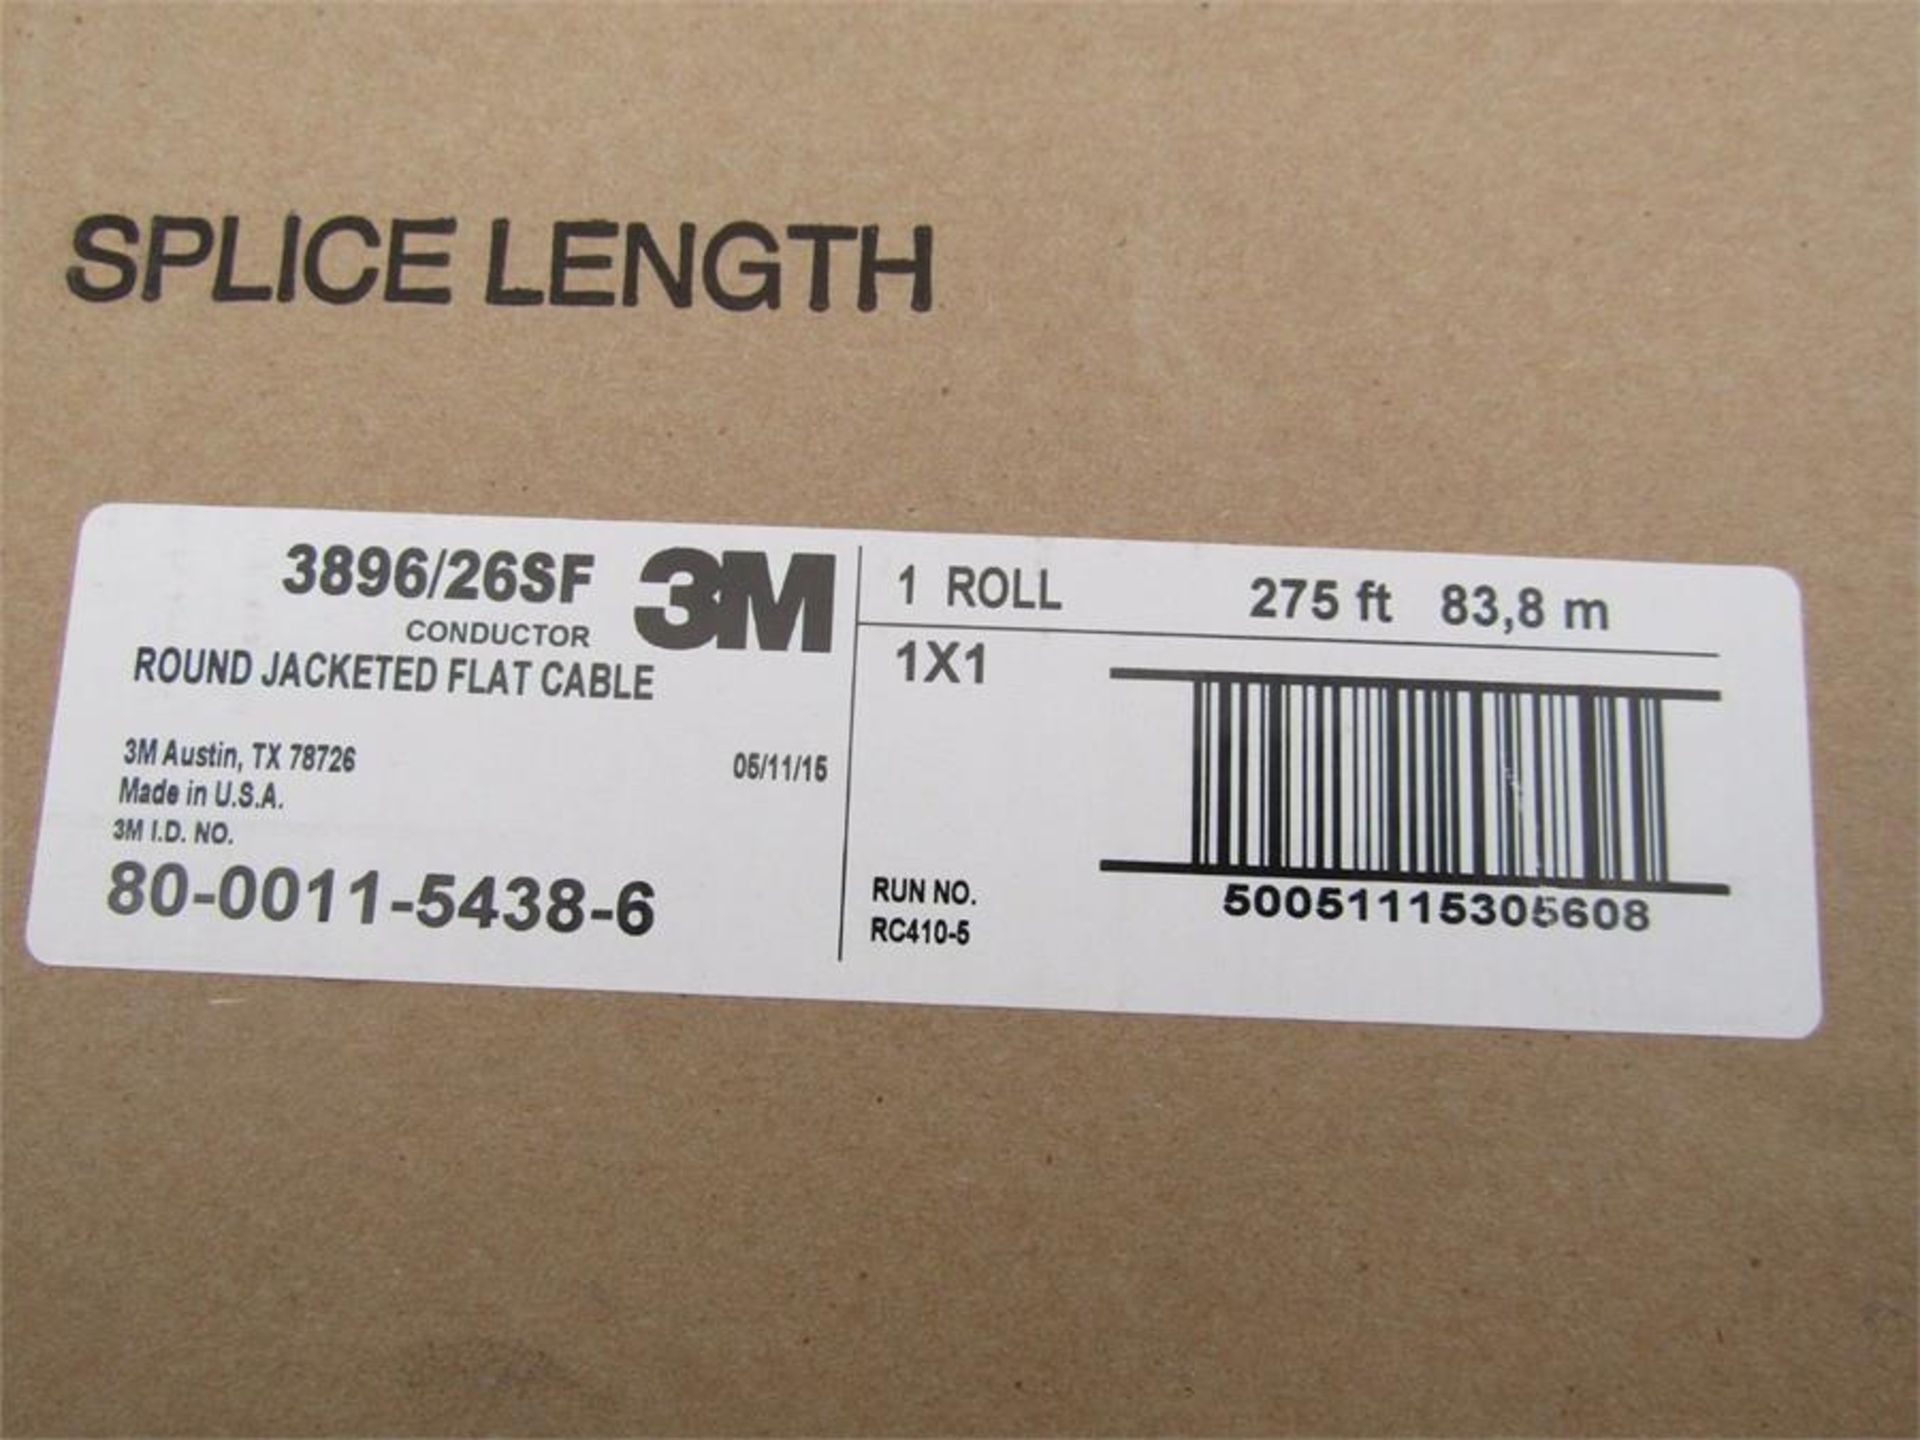 84m x 3M 3896 26 Way UnScreened Round Ribbon Cable, 15.88 mm Width 1005 8289728 - Image 2 of 3